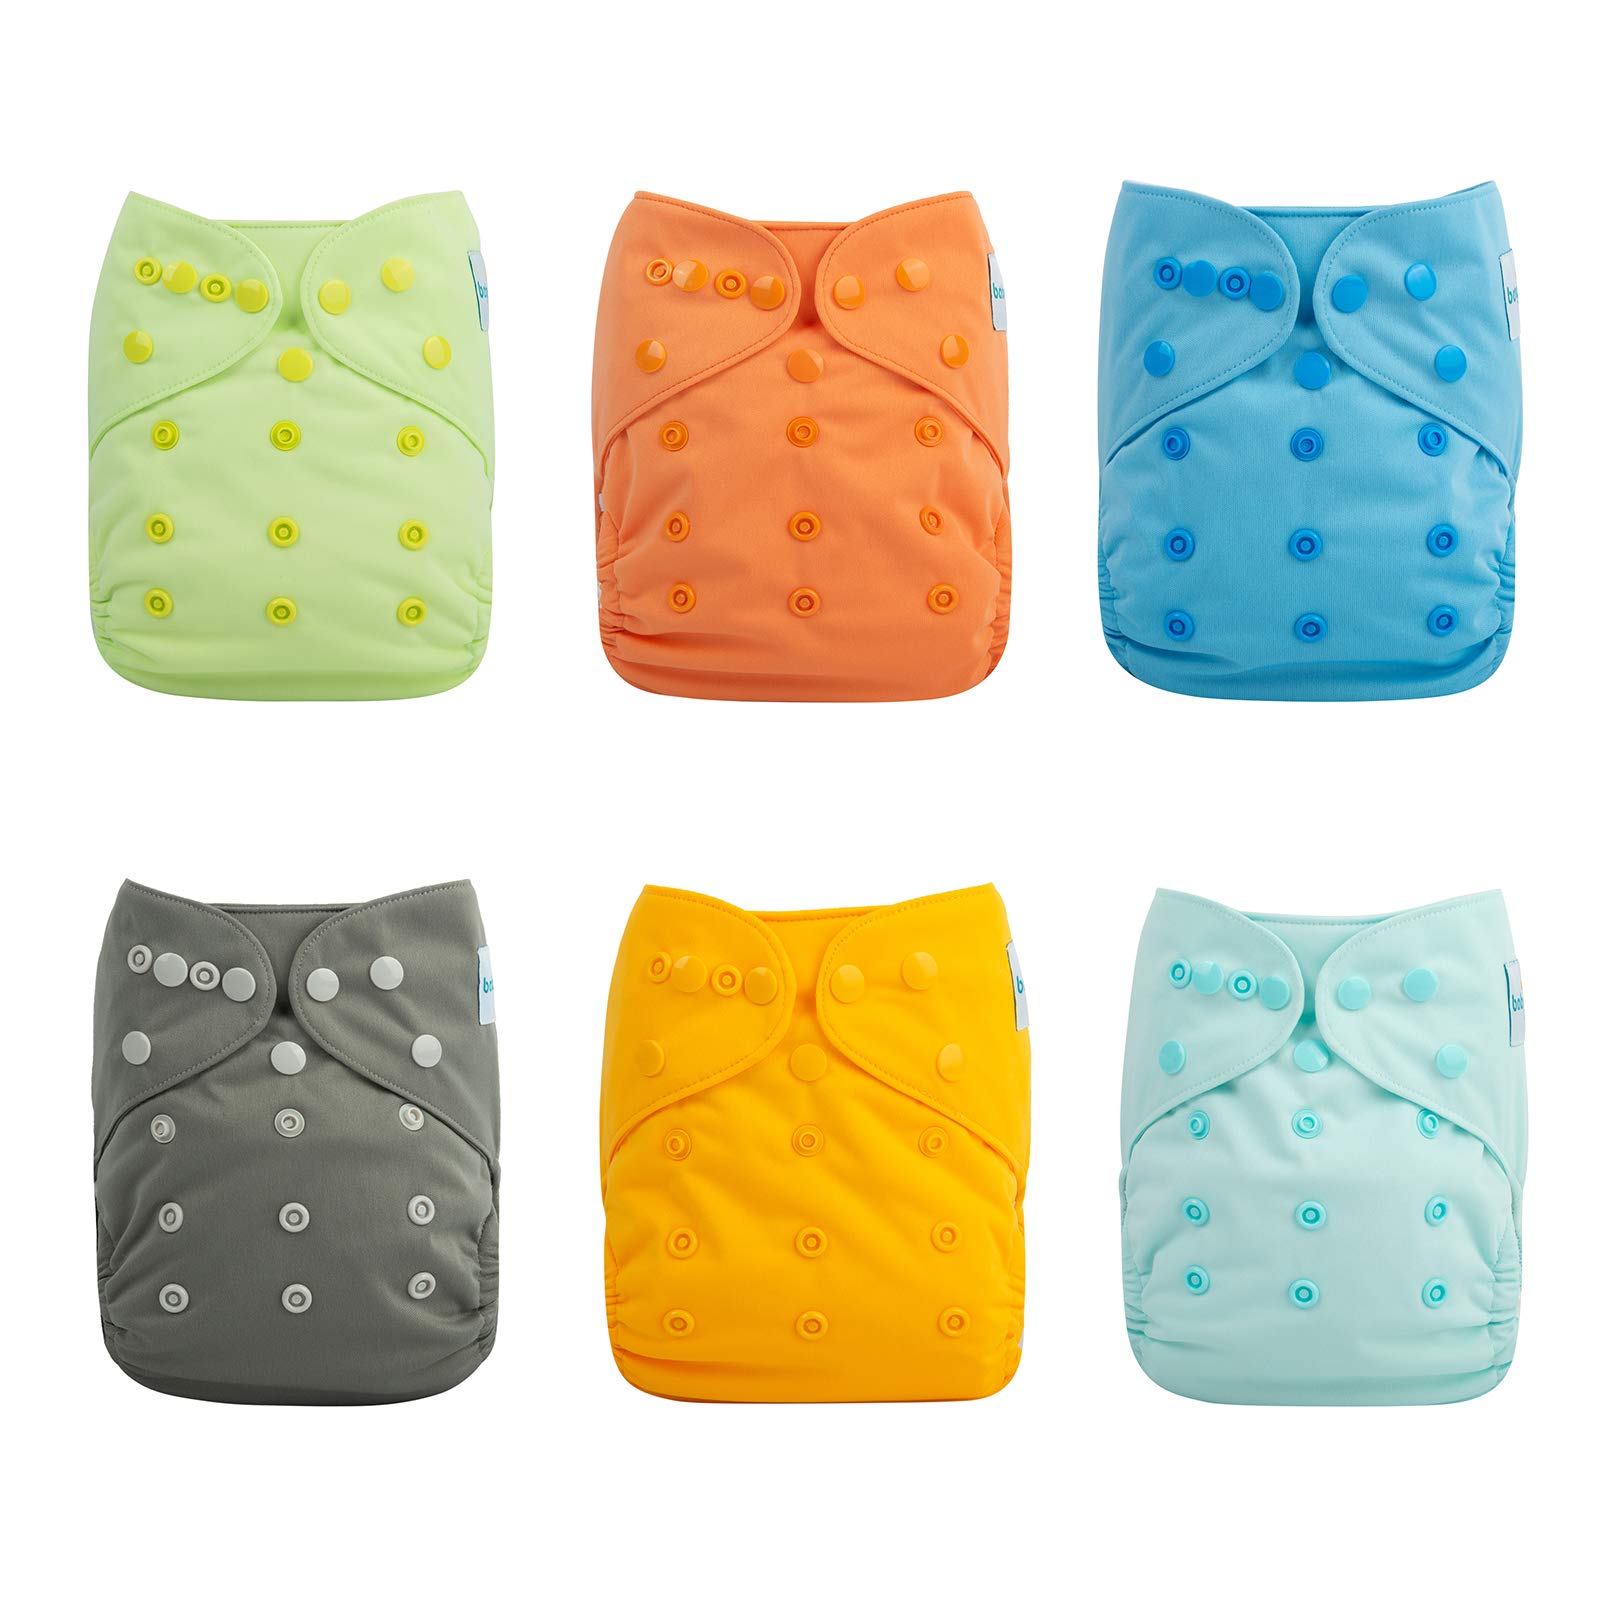 Babygoal Cloth Diaper Covers for Fitted Diapers and Prefolds with Double Gusset,Adjustable Reusable for Baby Boys, 6pcs Covers+One Wet Bag 6DCF06